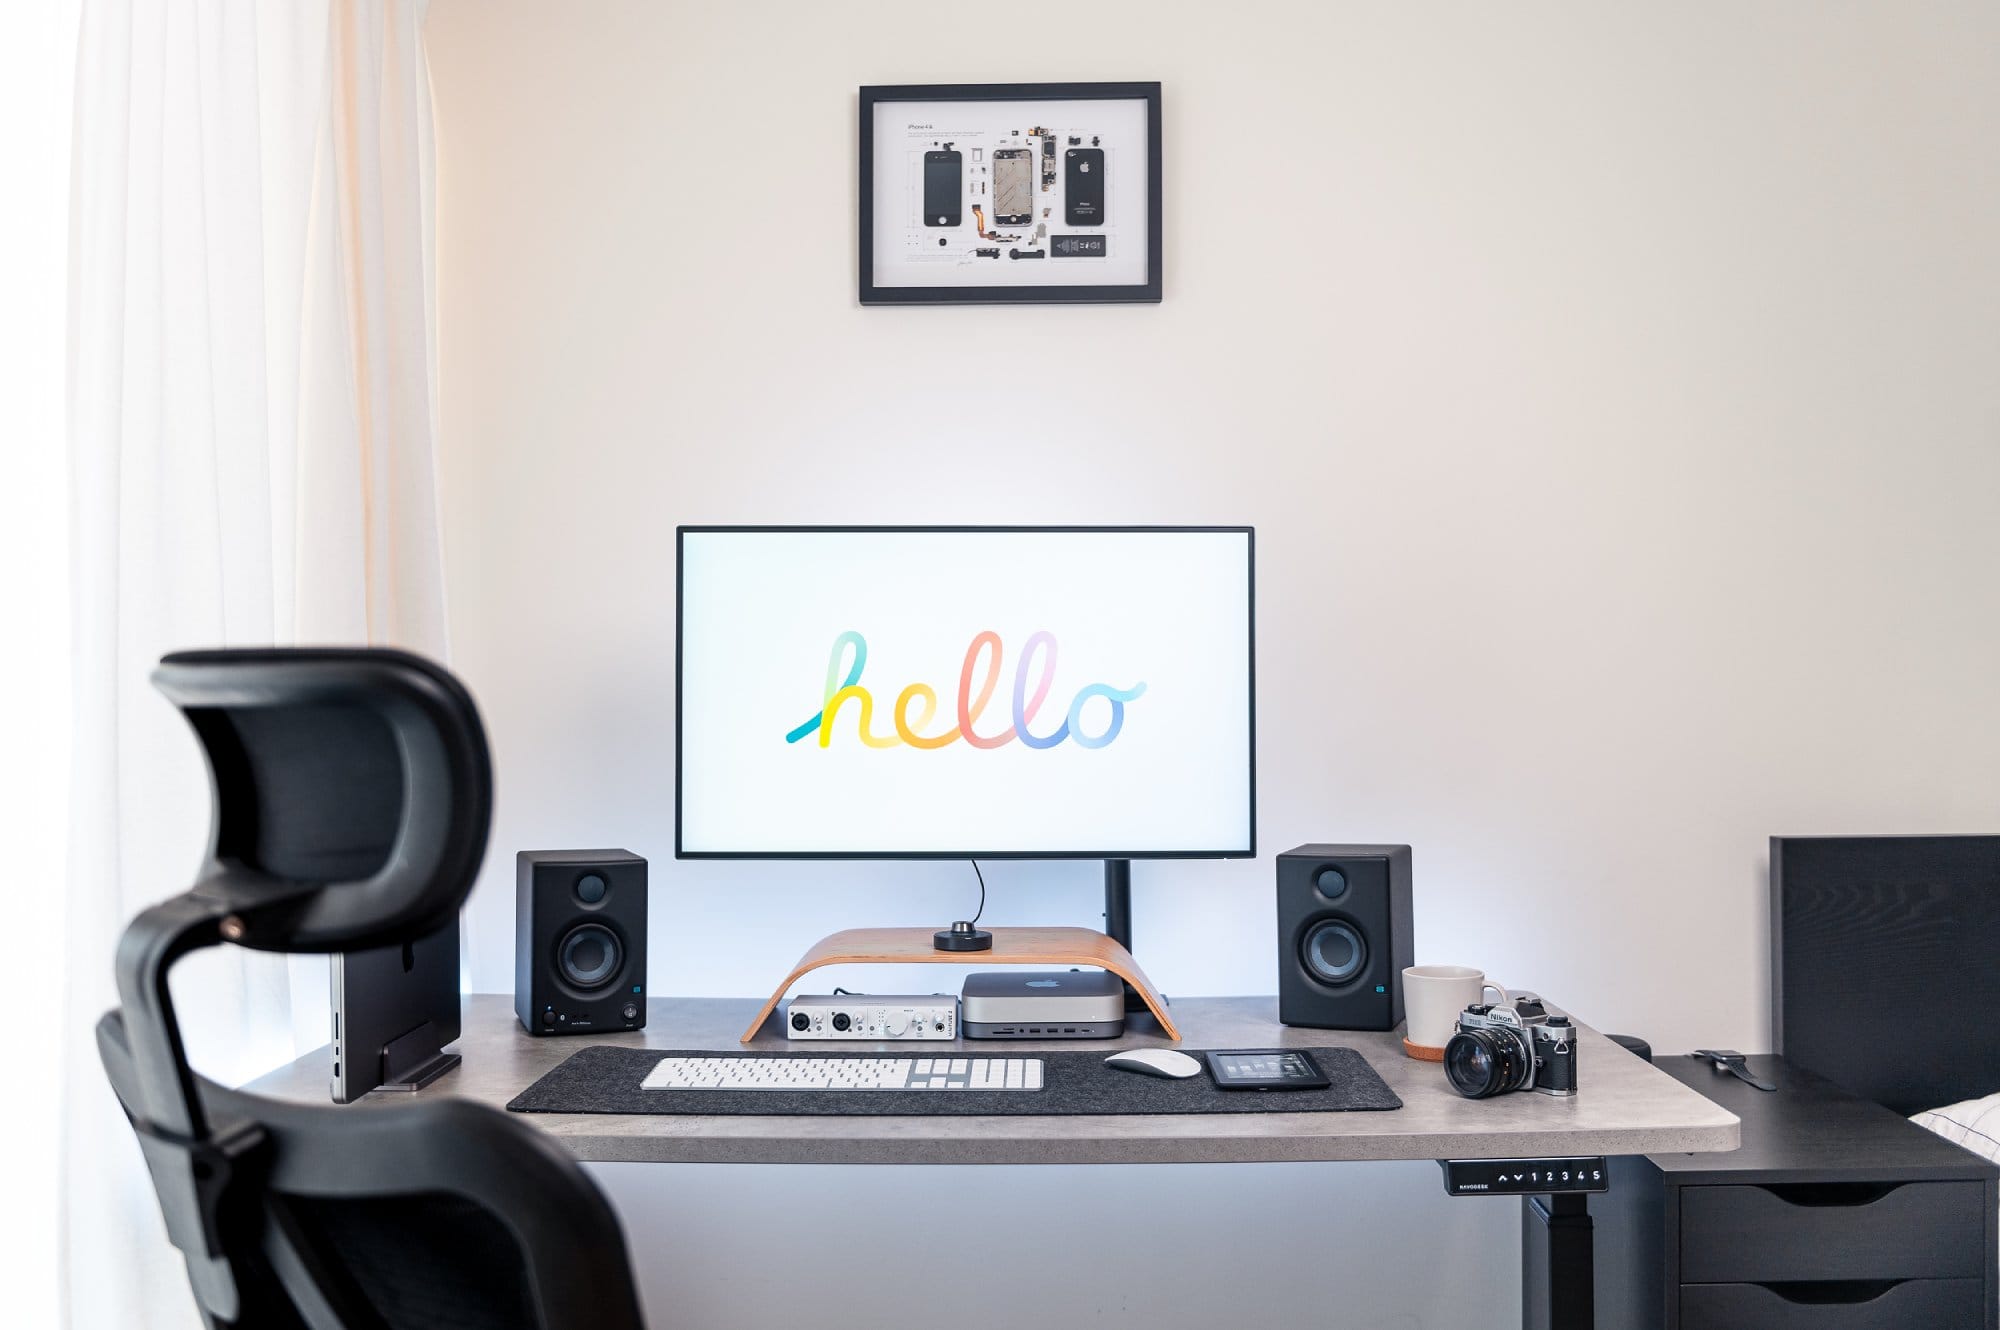 A neatly organised desk space with a central monitor displaying a multicoloured “hello”, speakers on each side, a laptop, camera, and audio equipment, with a framed smartphone schematic on the wall